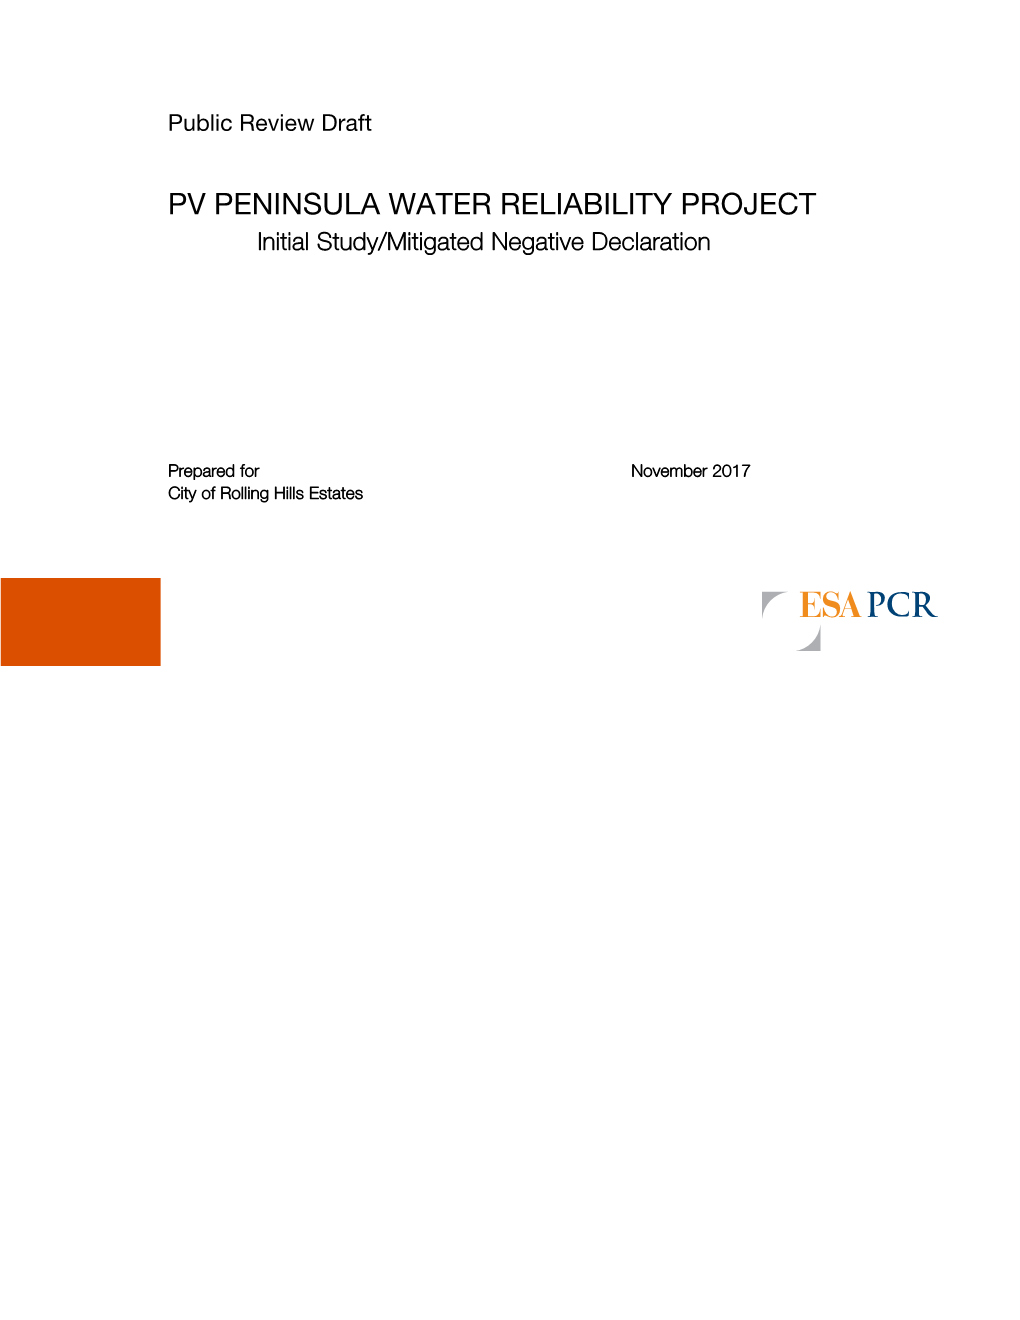 PV PENINSULA WATER RELIABILITY PROJECT Initial Study/Mitigated Negative Declaration